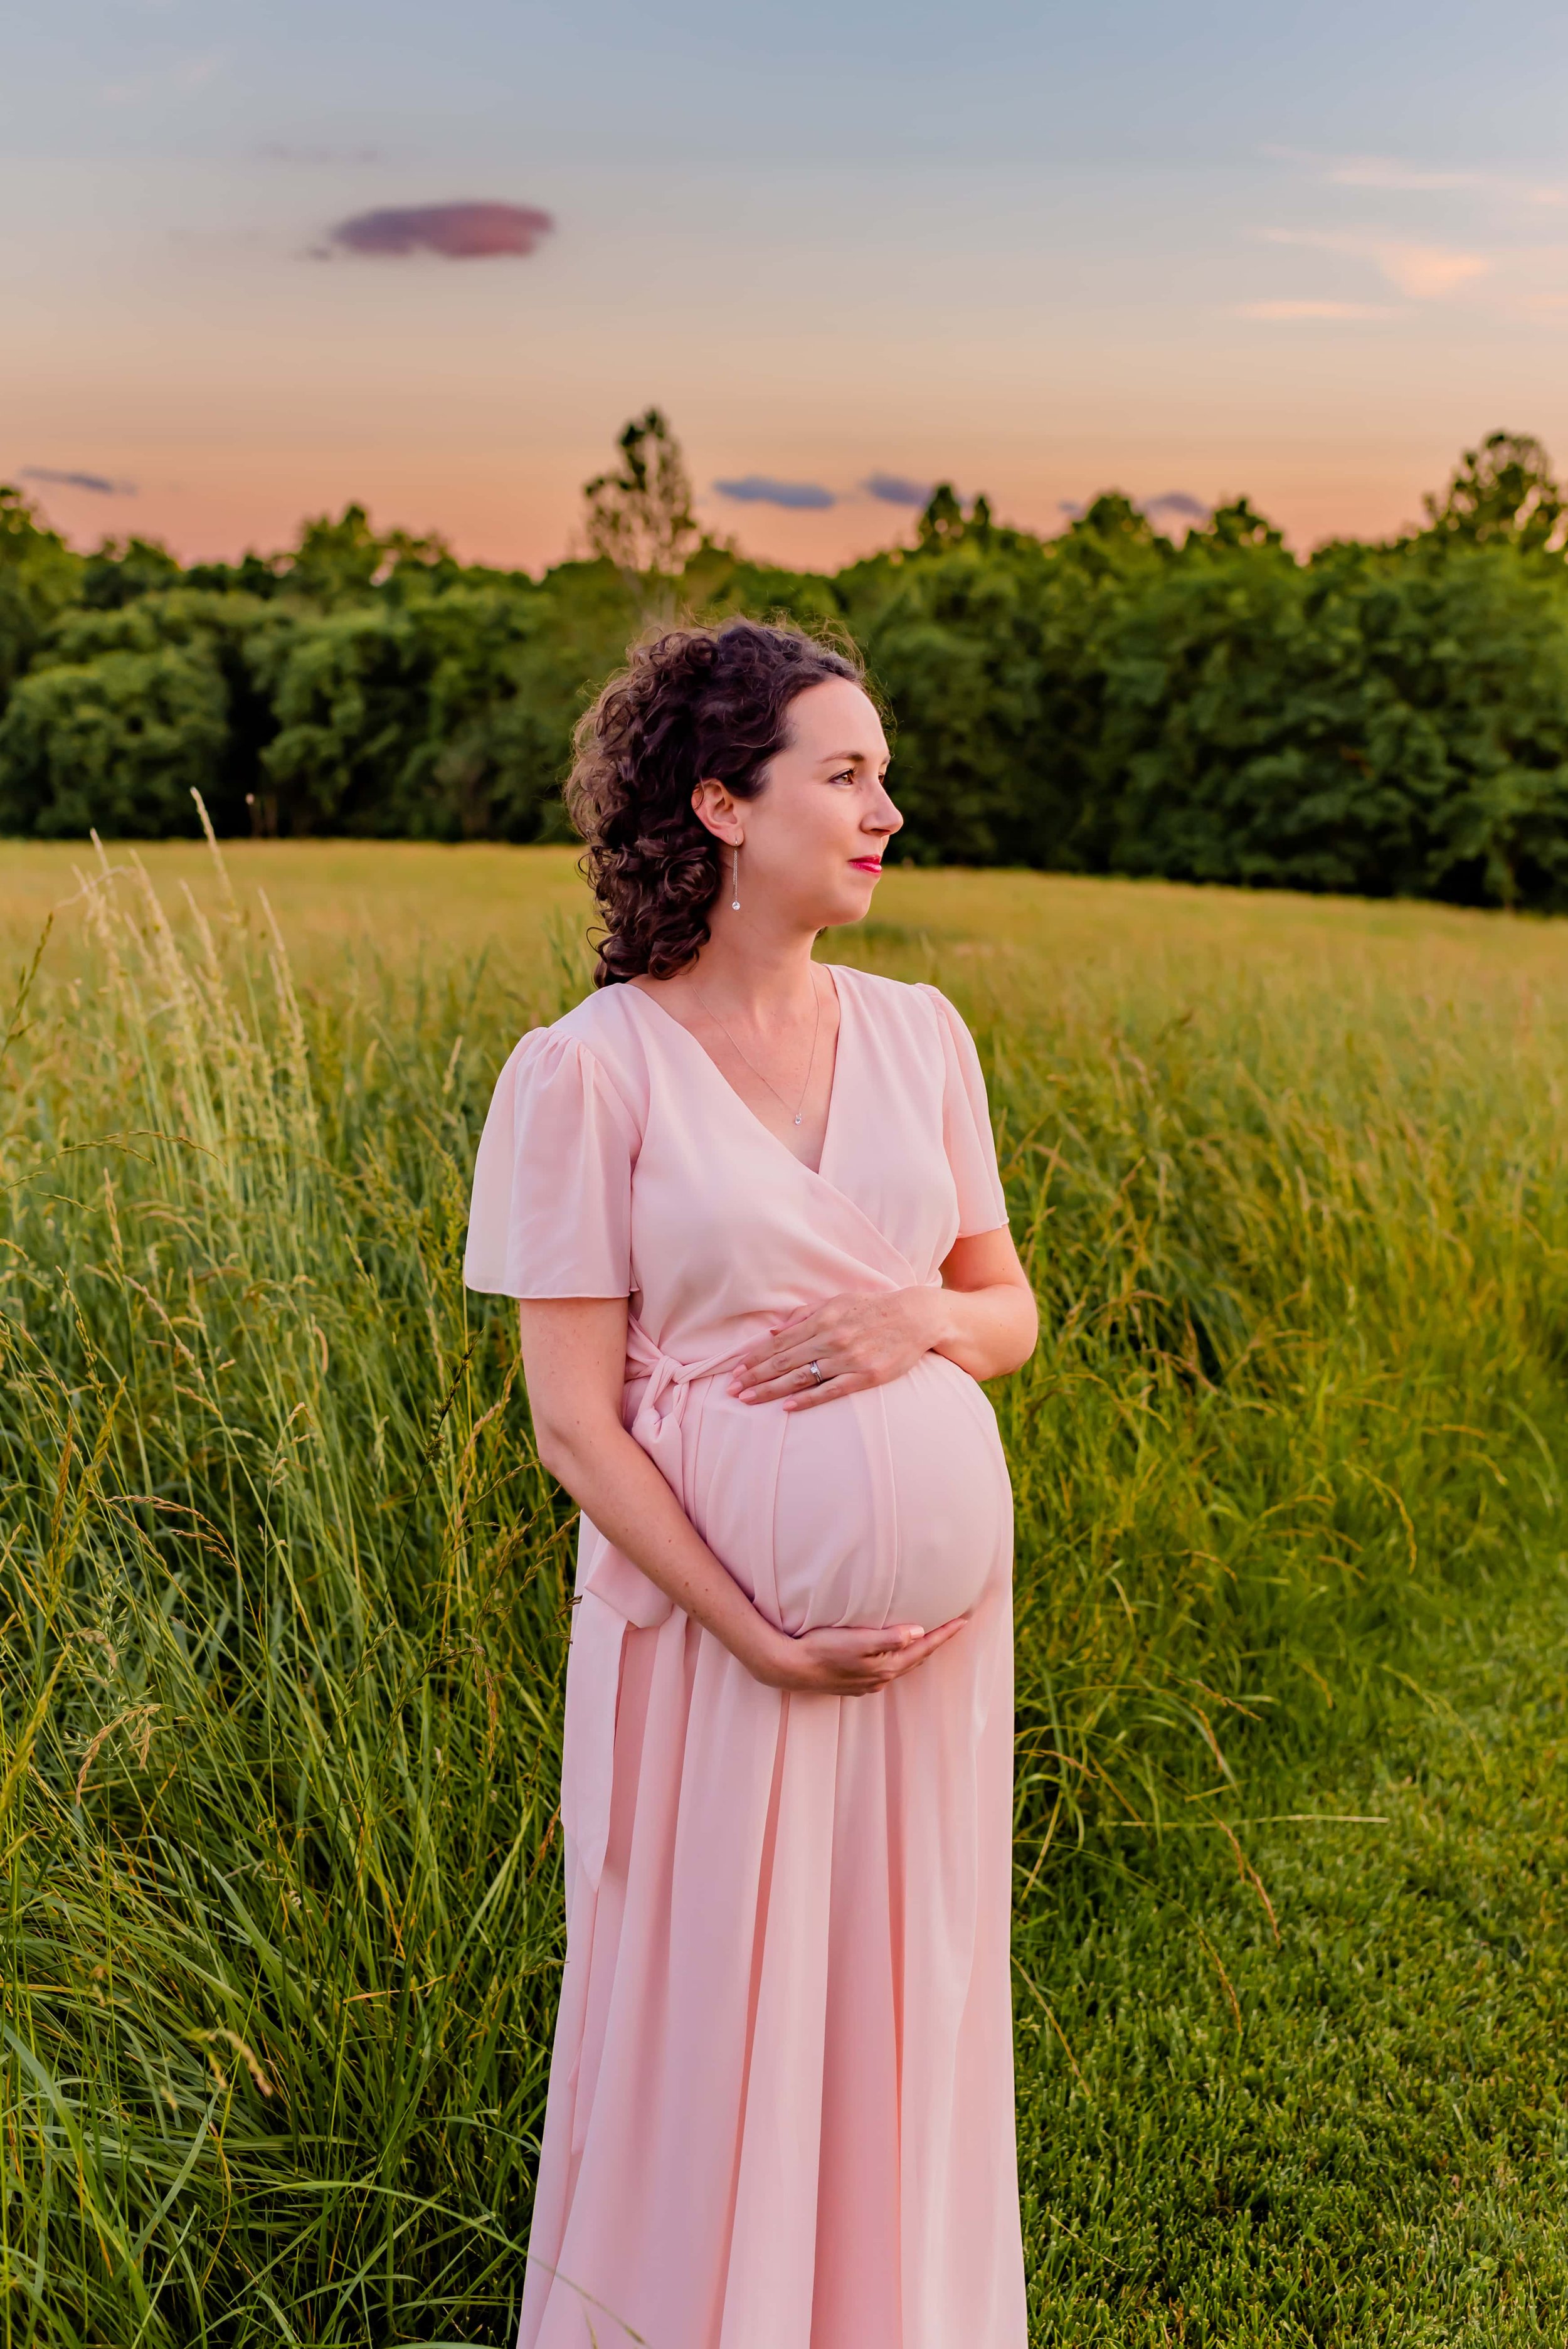 Maternity photo of woman standing in a field holding her belly and looking into the distance